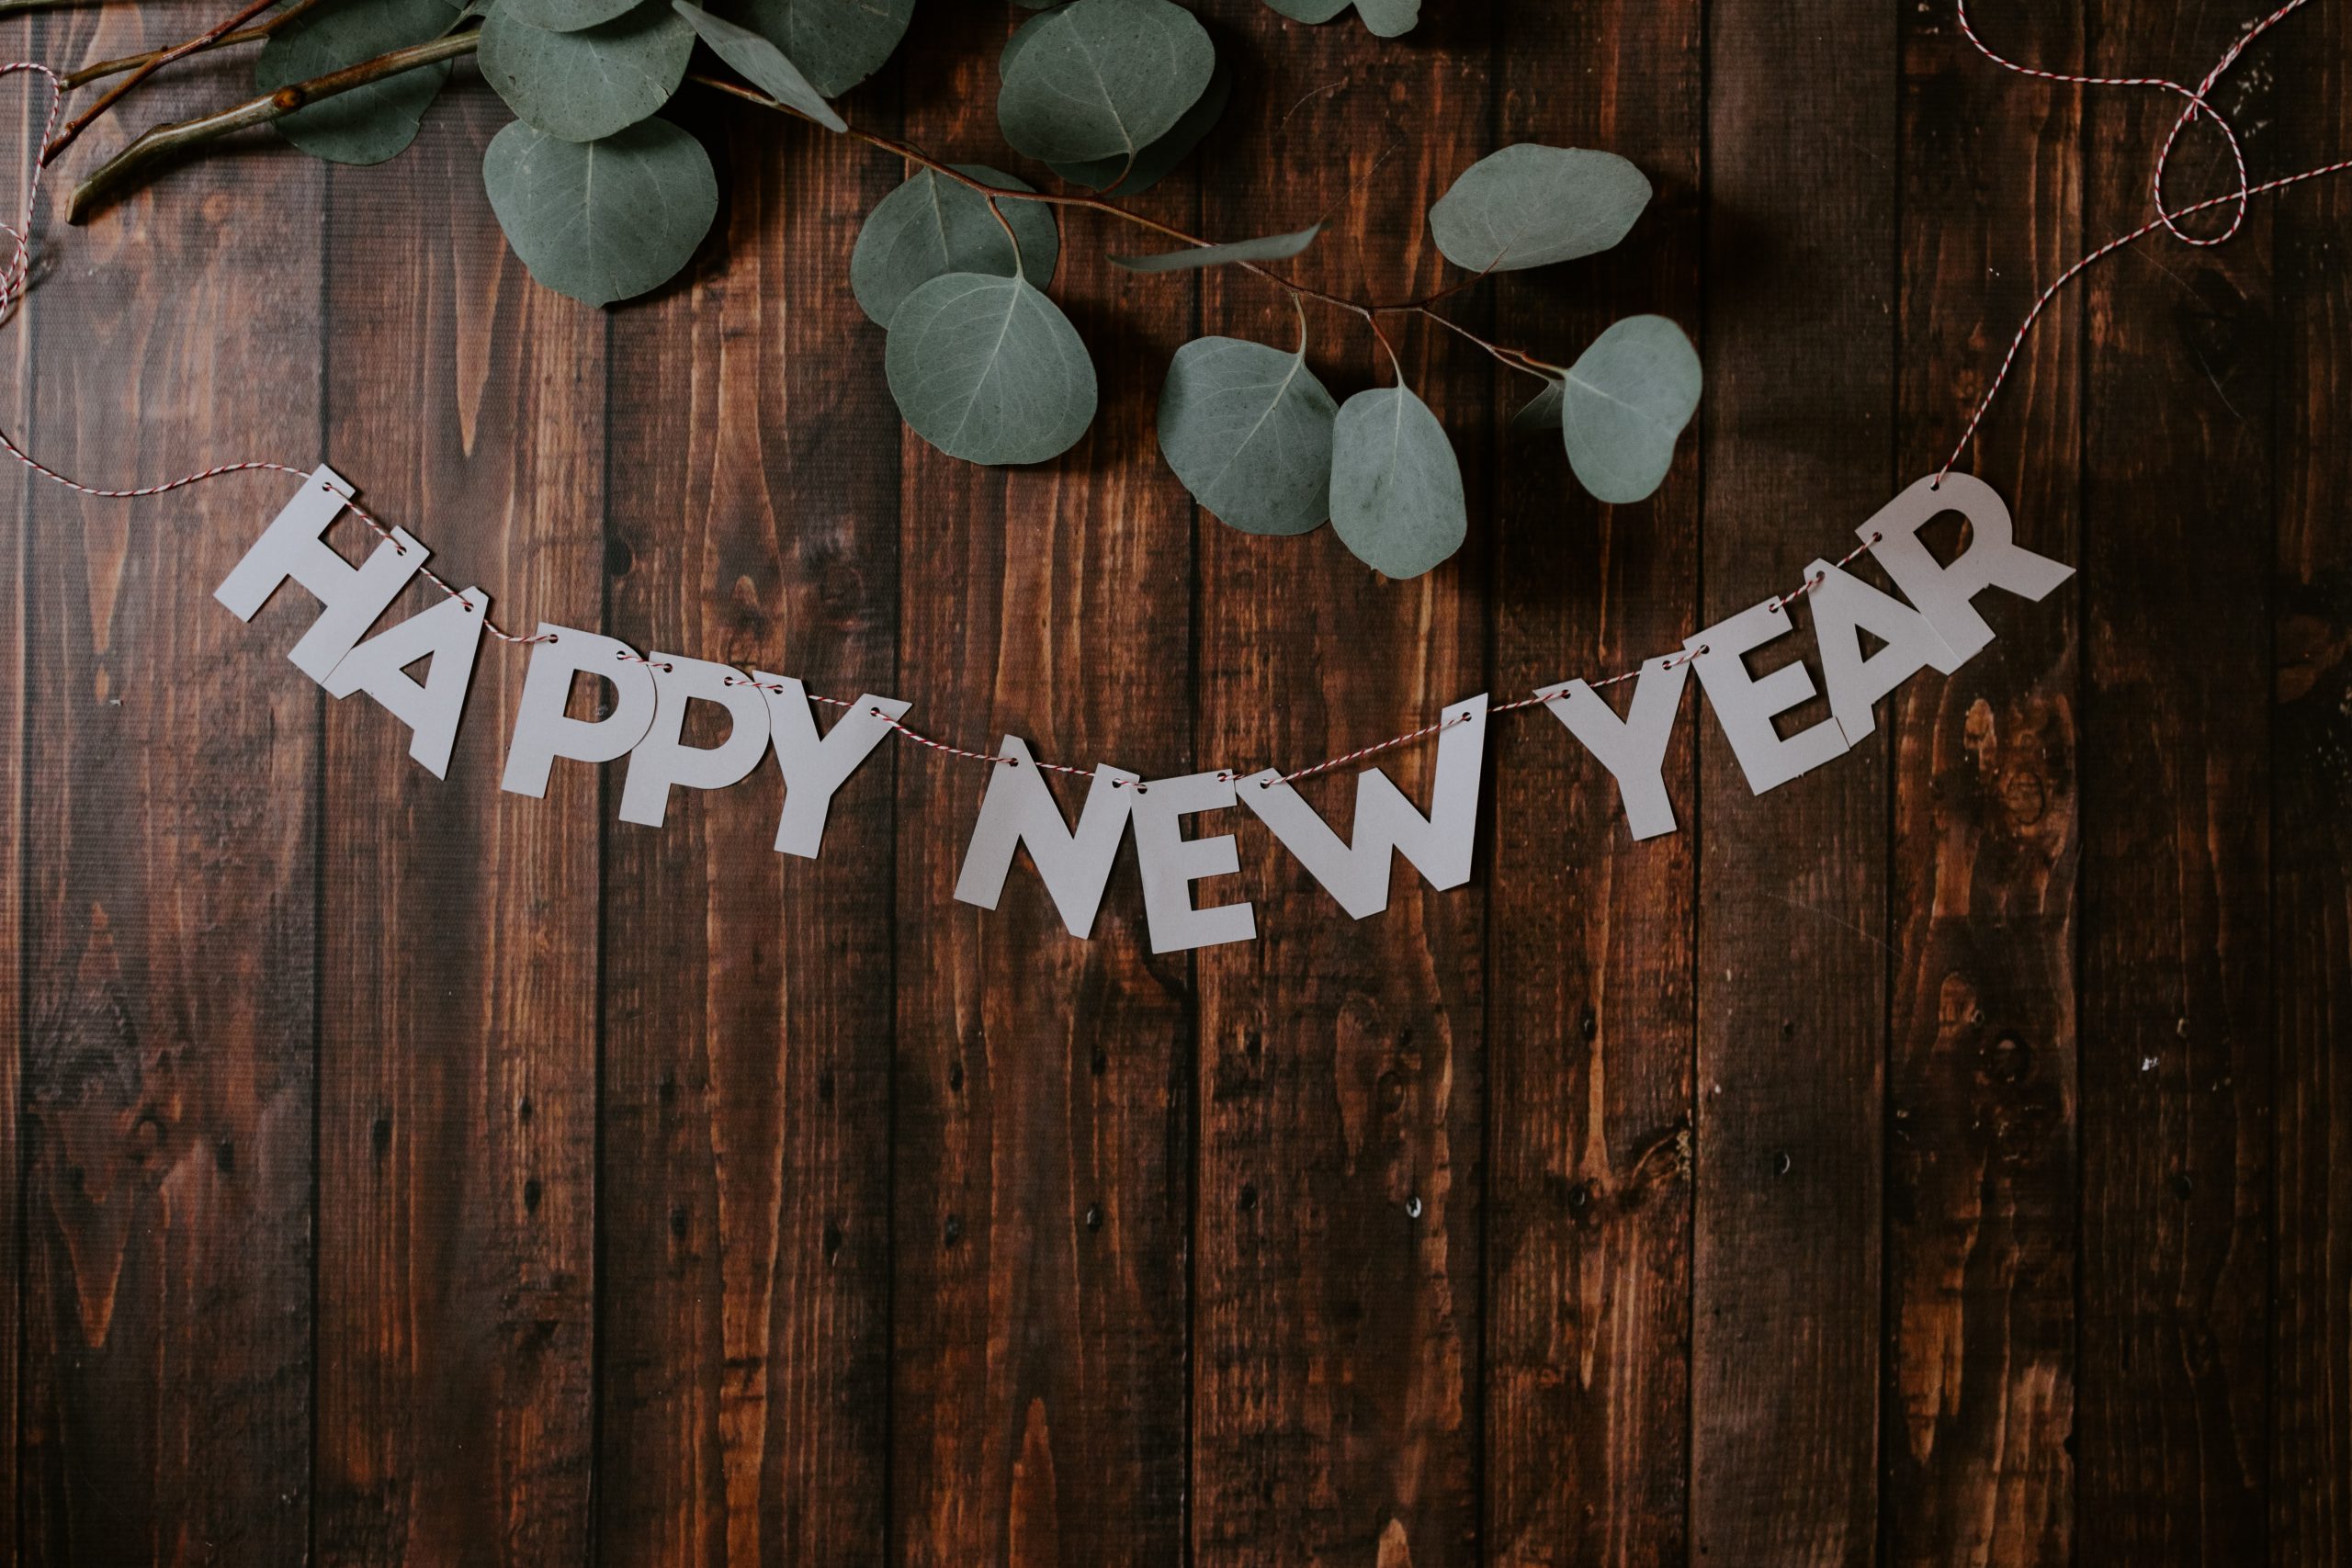 Image of a banner saying "Happy New Year"